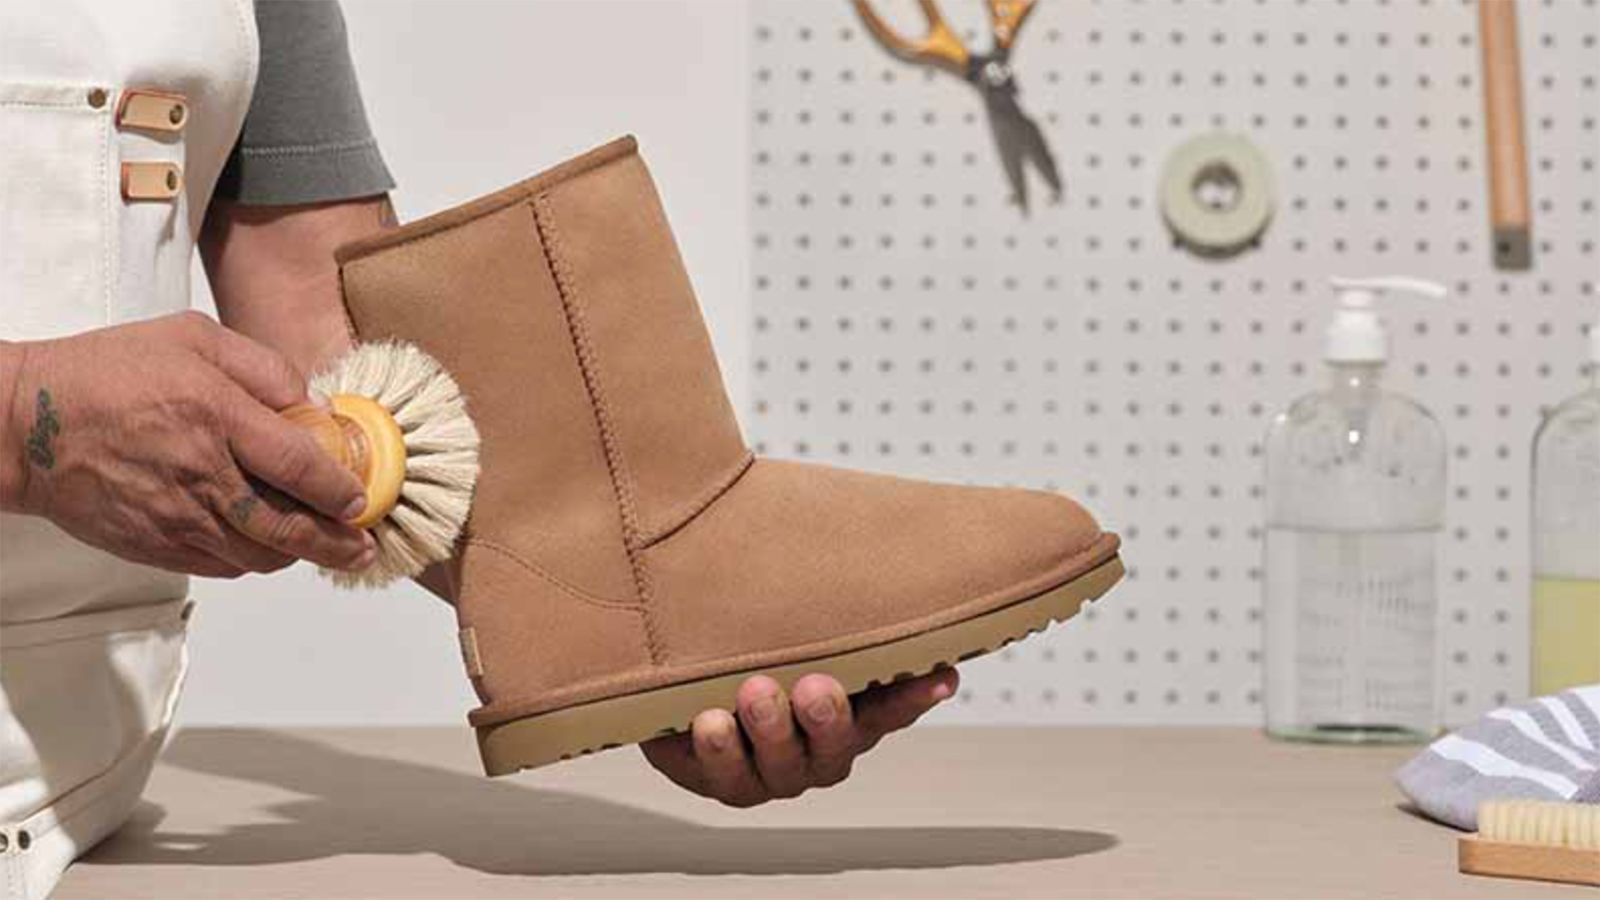 Are Ugg Boots Suede? Expert Guide & Comparisons